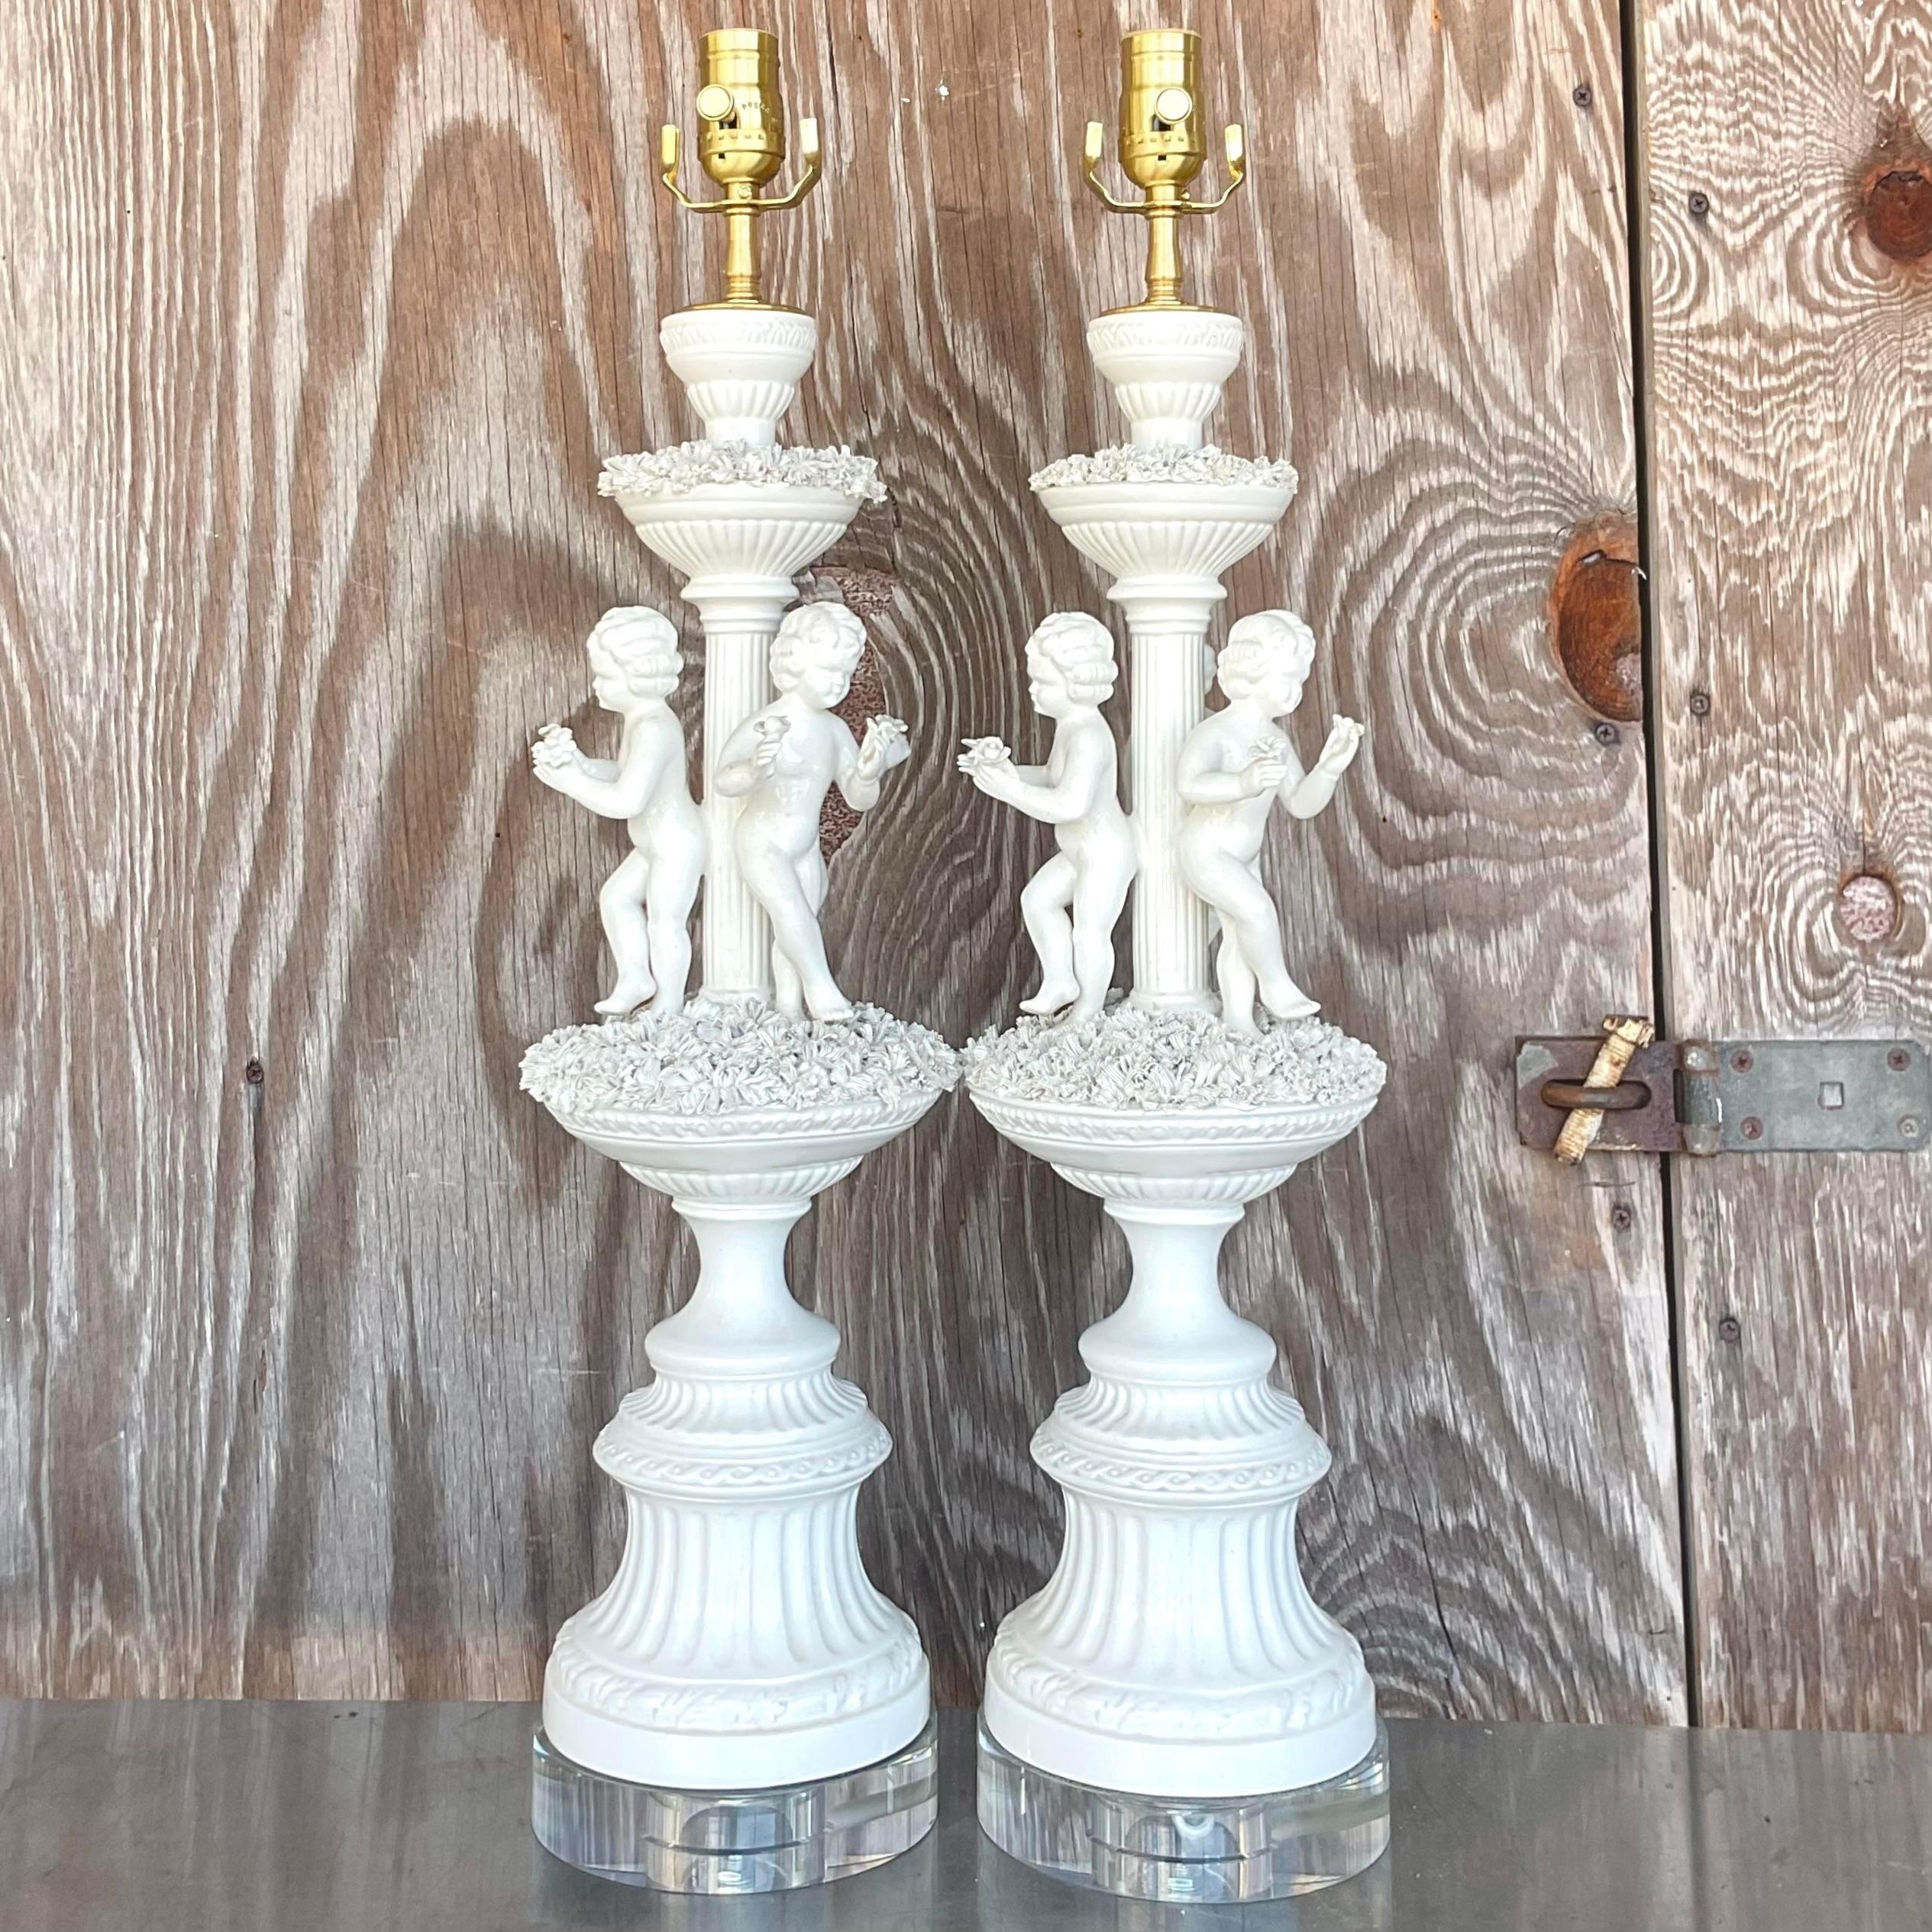 Vintage Regency Glazed Ceramic Putti Style Lamps - a Pair For Sale 3